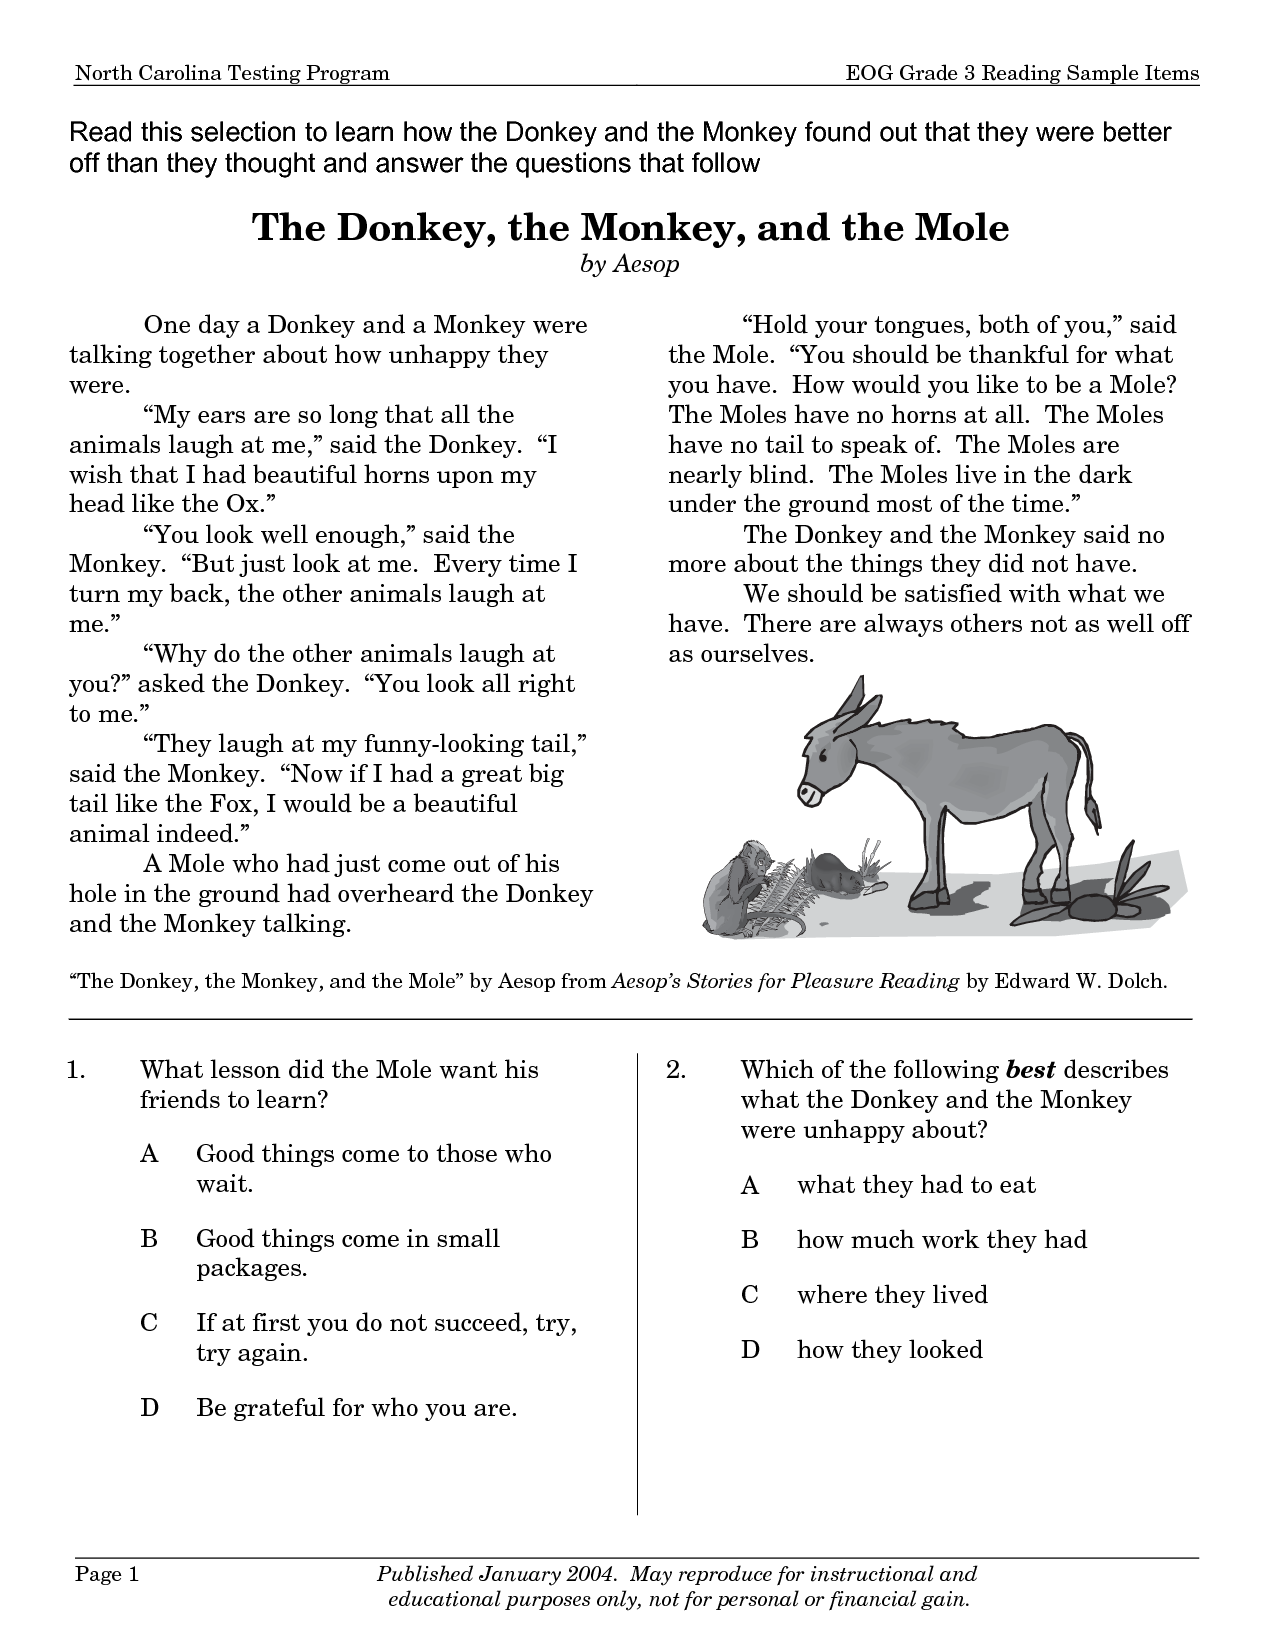 14 Best Images of Accelerated Math Worksheets 3rd Grade Common Core